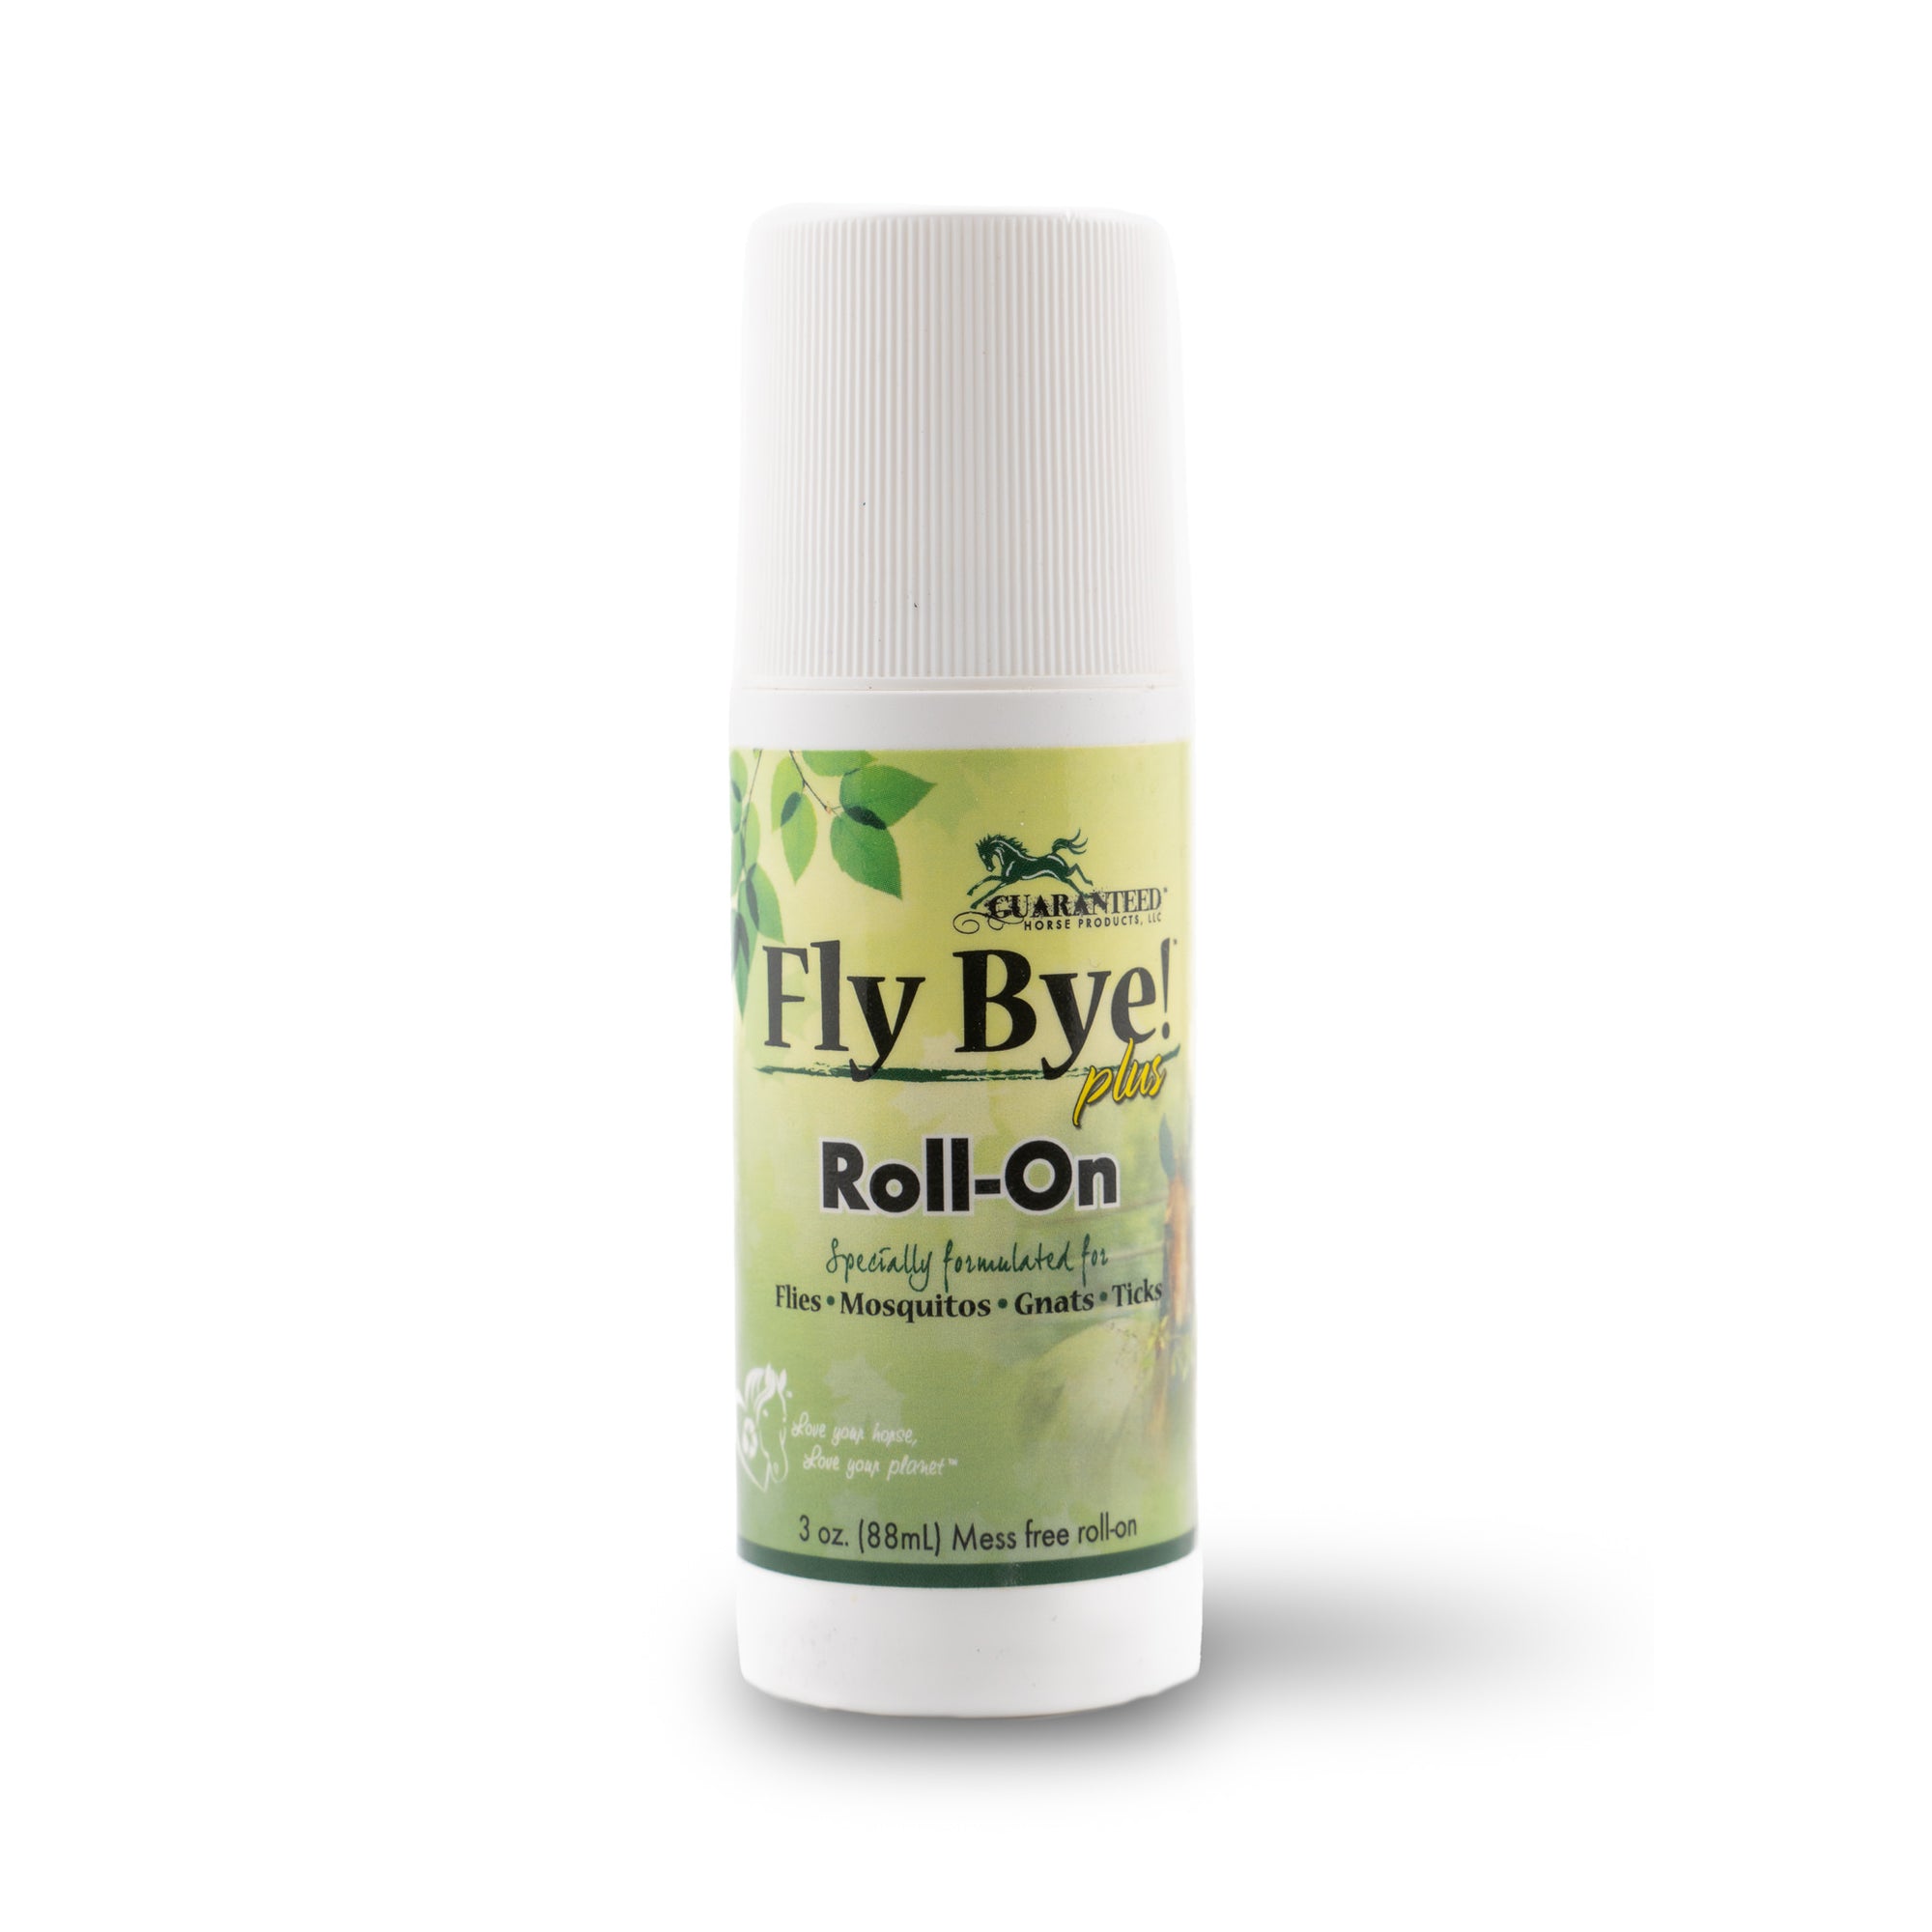 Fly protection for hard to reach and sensitive areas with Fly Bye! Plus Roll On